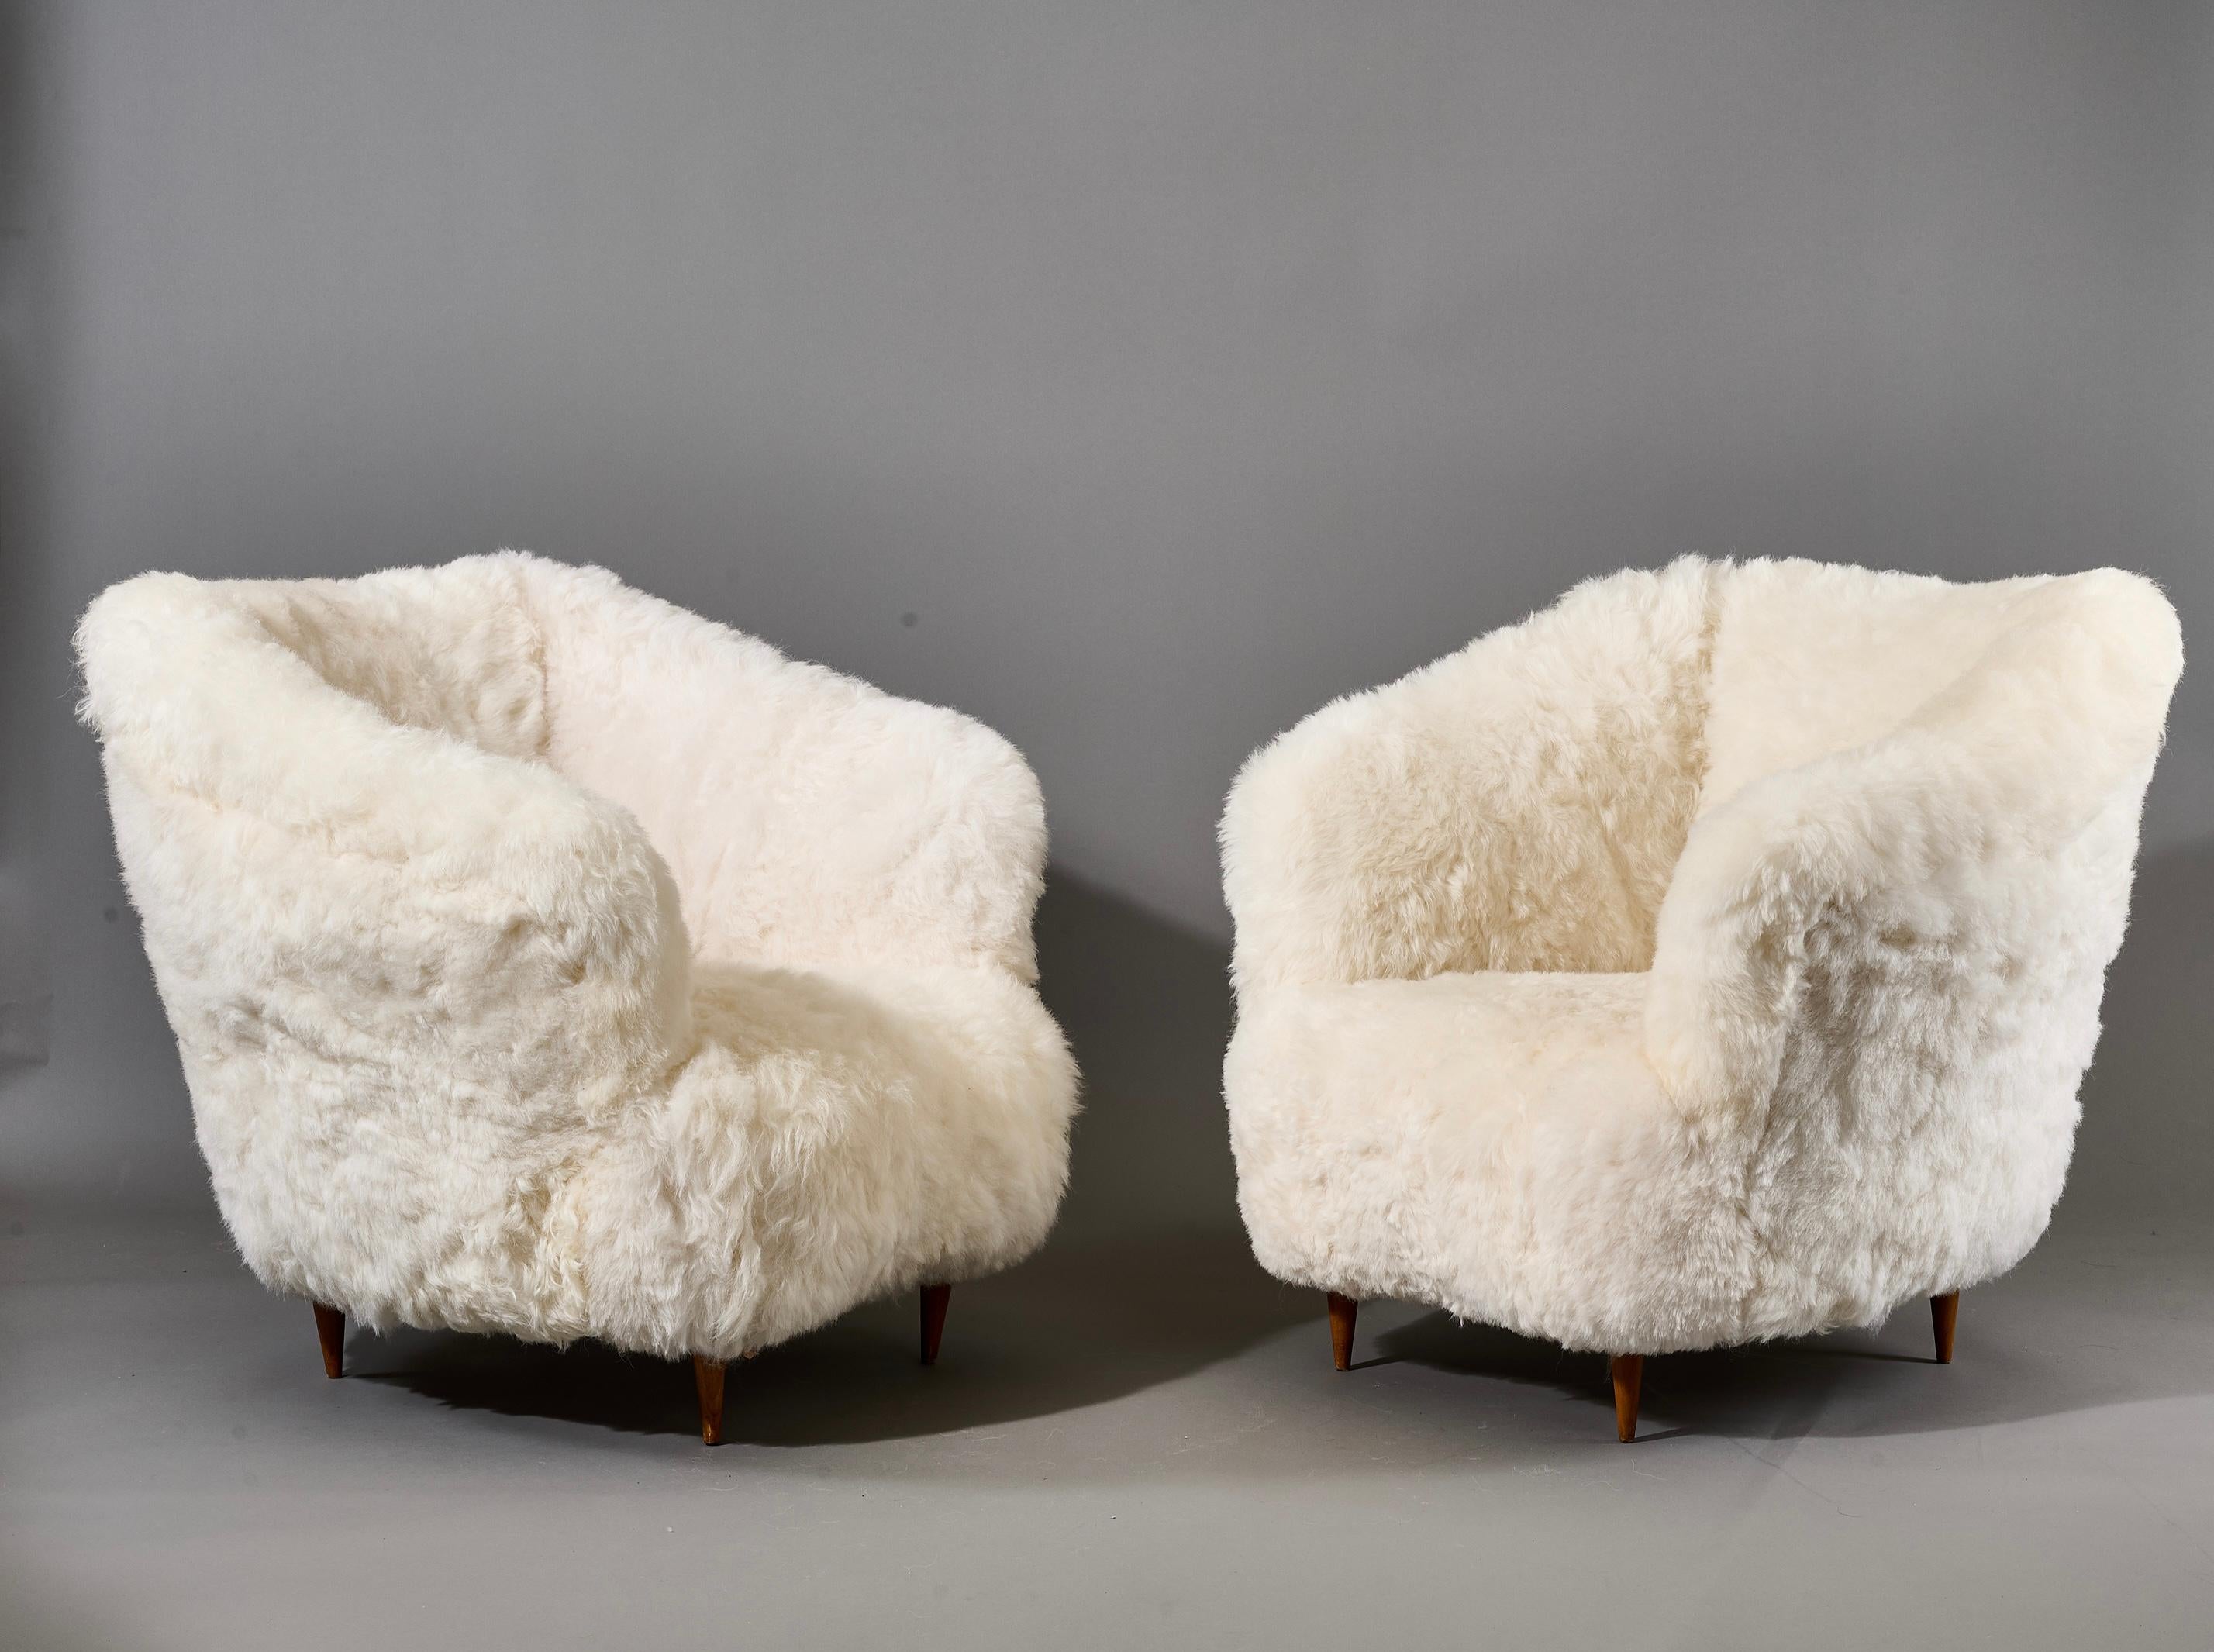 Gio Ponti: Armchairs in White Sheepskin, Italy 1950s For Sale 1